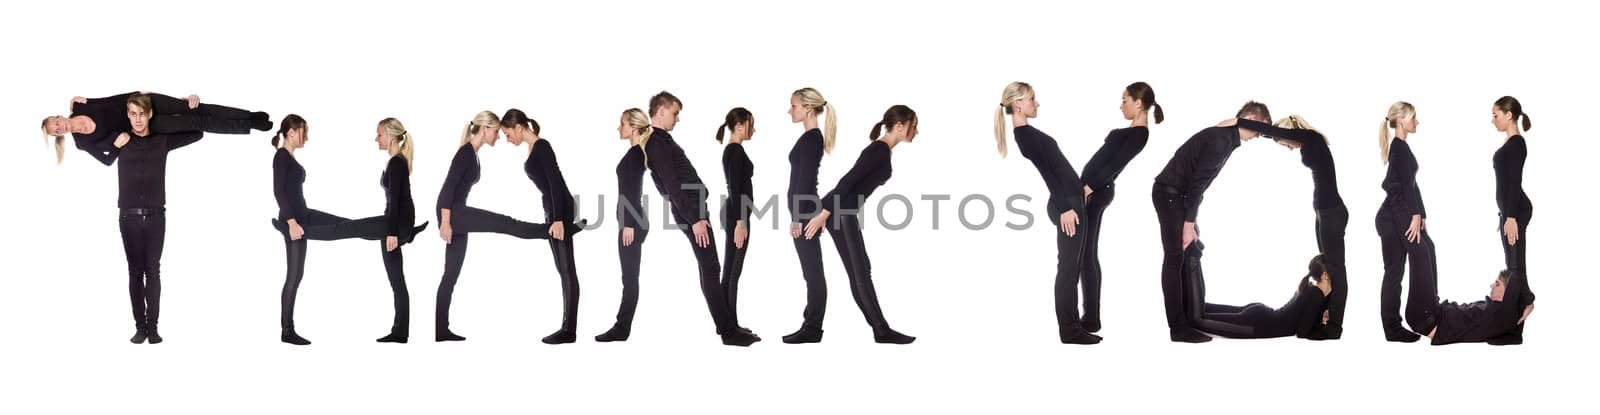 Group of people forming the phrase 'Thank you', isolated on white background.